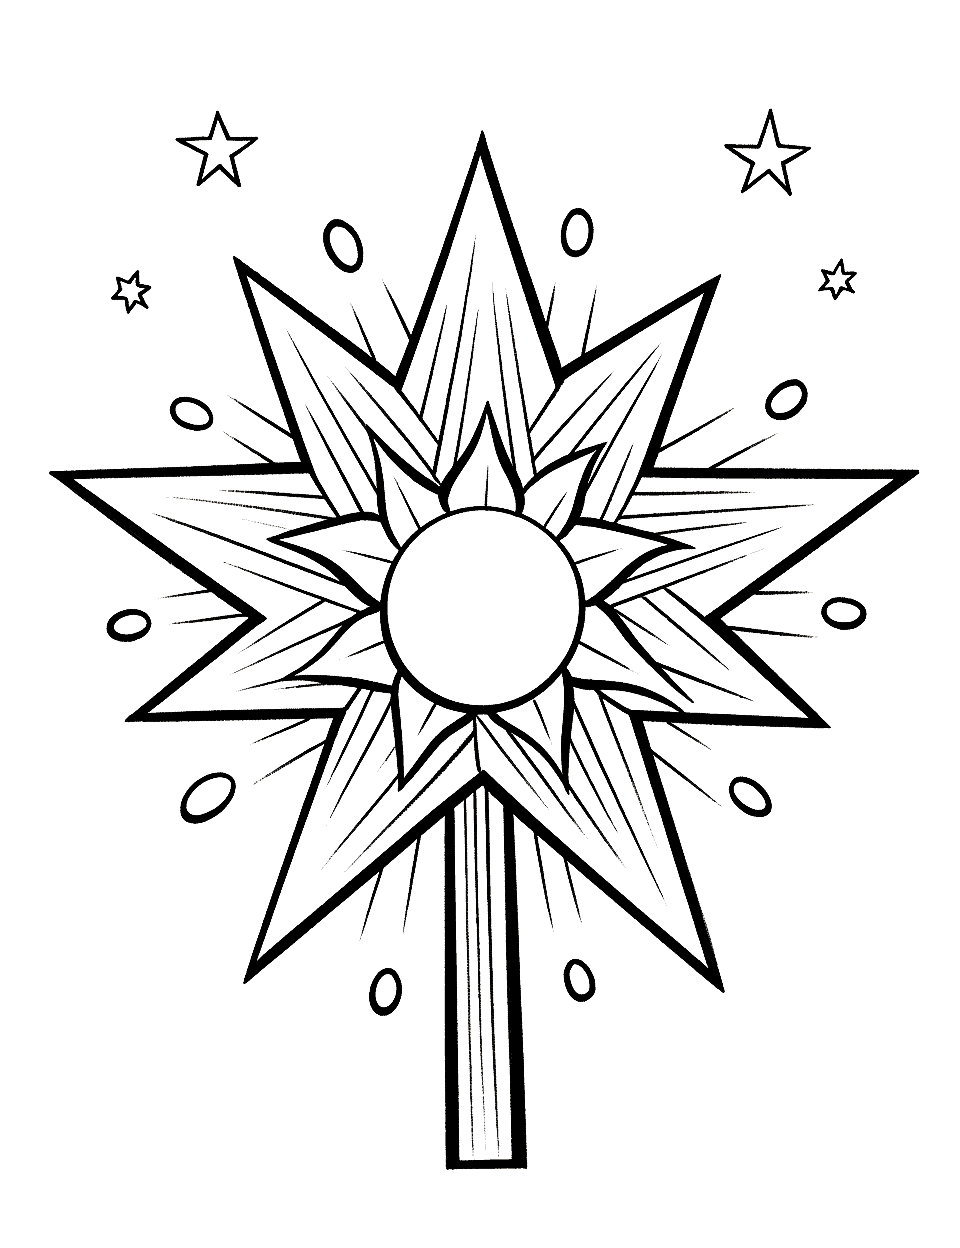 Christmas Star Coloring Page - A radiant Christmas star shining over a humble manger scene.